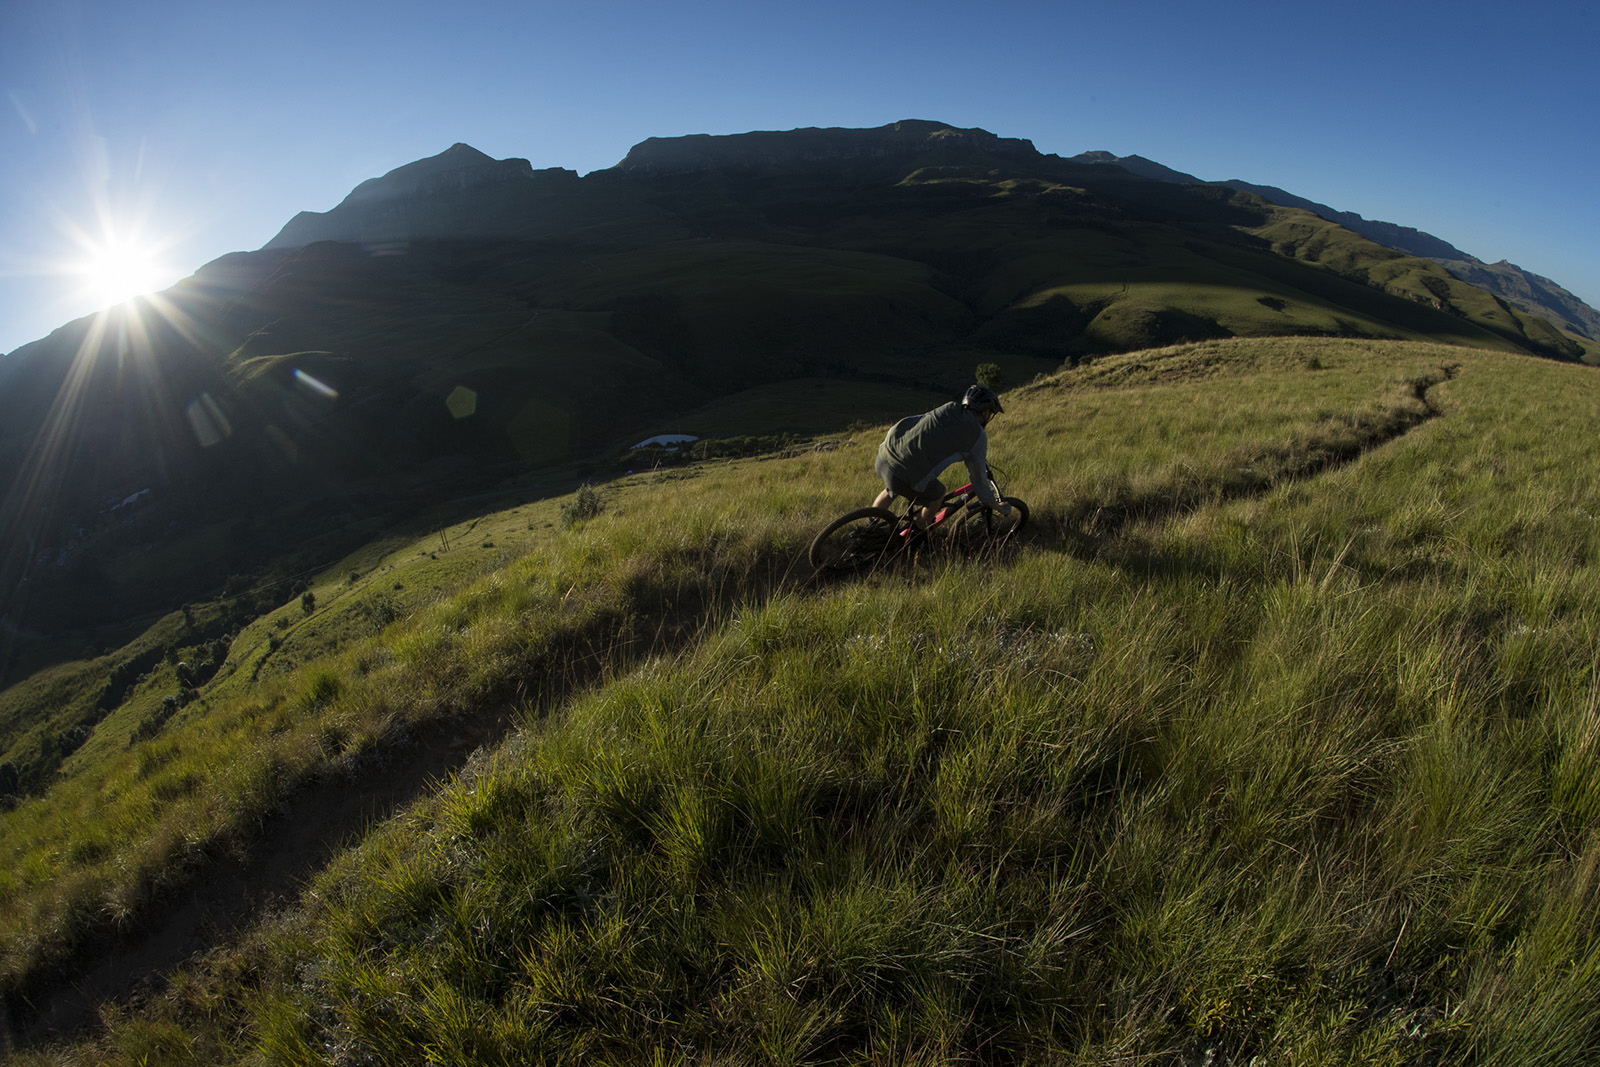 Matt Hunter rides with locals Hylton Turvey and Fanie Kok on the trails in the Karkloof and Drakensberg Range of South Africa